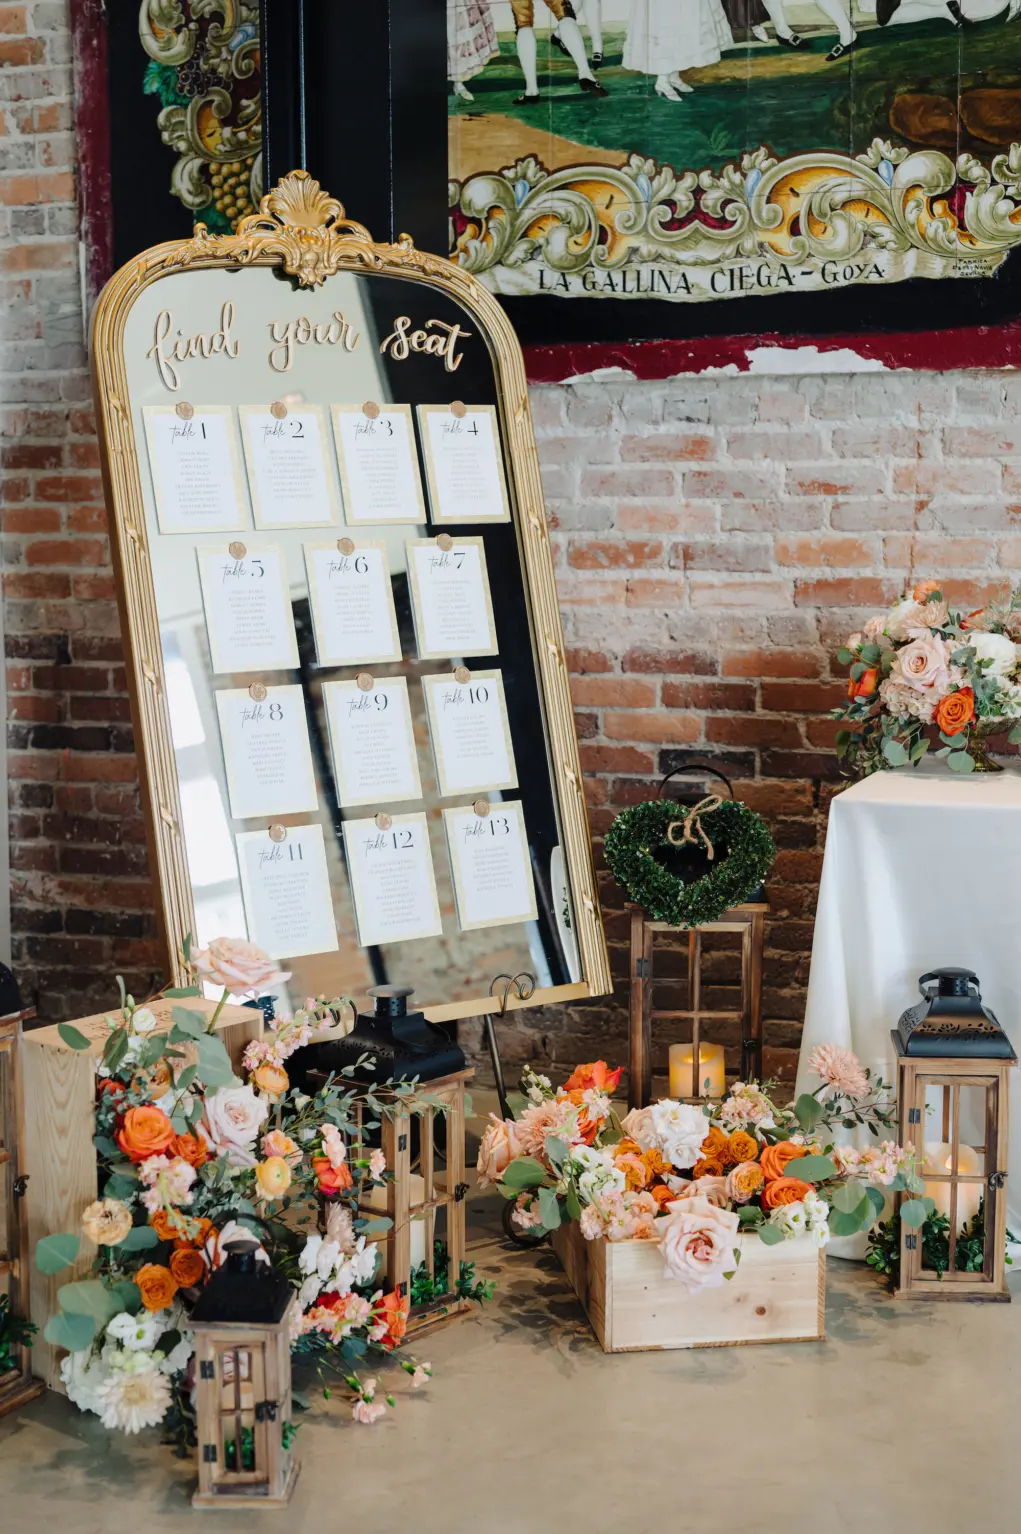 Find Your Seat Gold Mirror Seating Chart for Wedding Reception Inspiration | Lanterns with Orange, White, and Pink Roses with Greenery